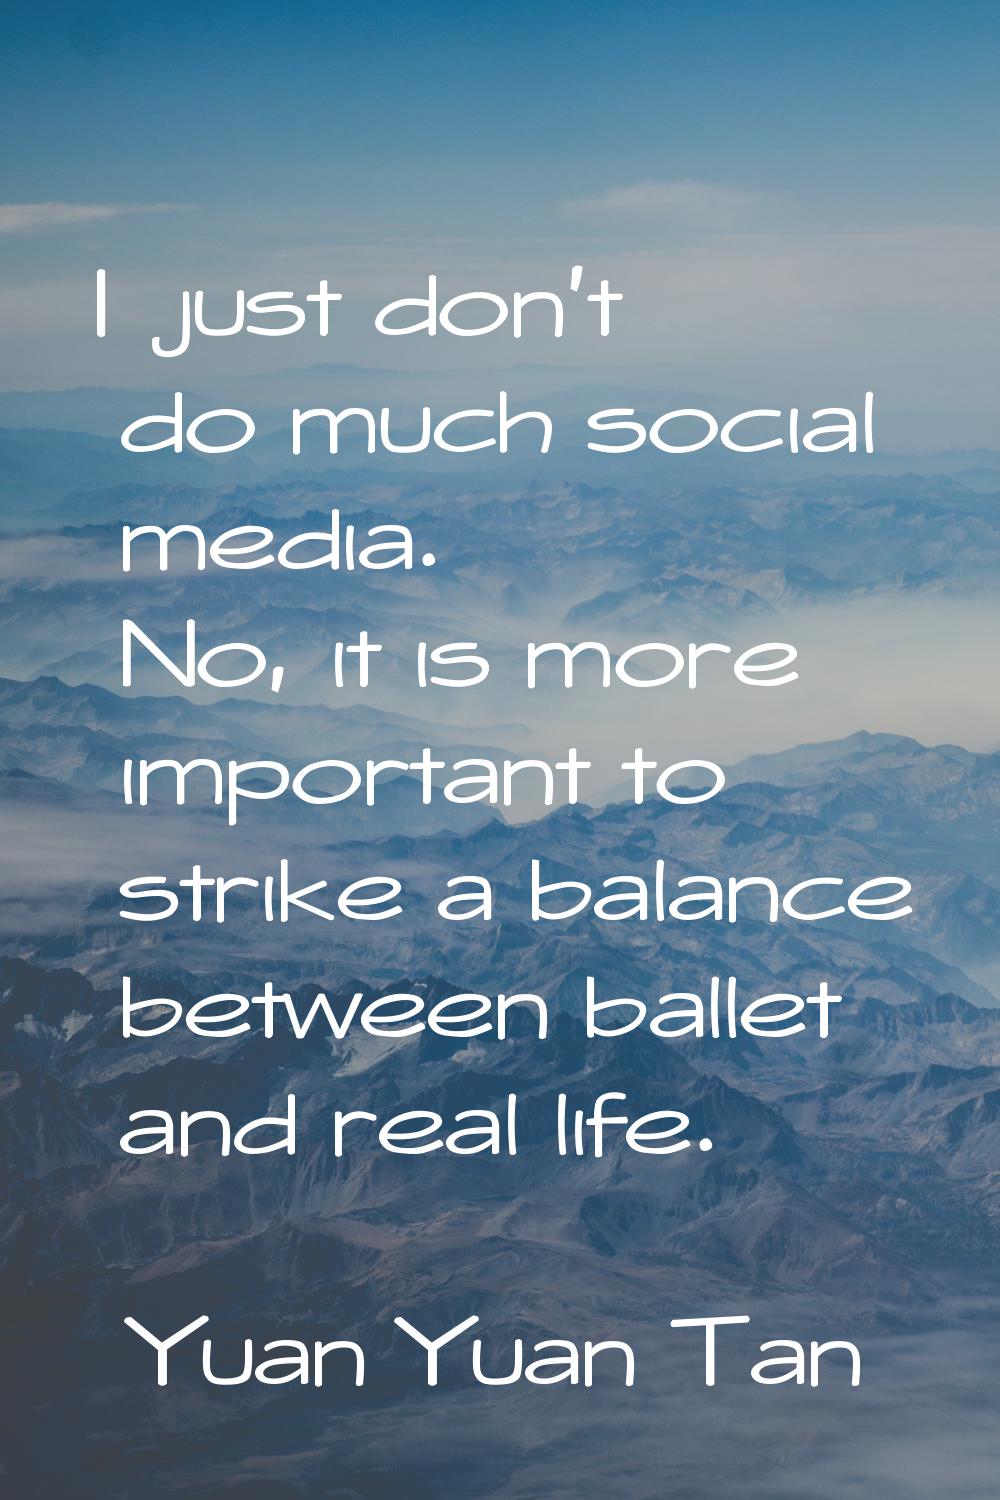 I just don't do much social media. No, it is more important to strike a balance between ballet and 